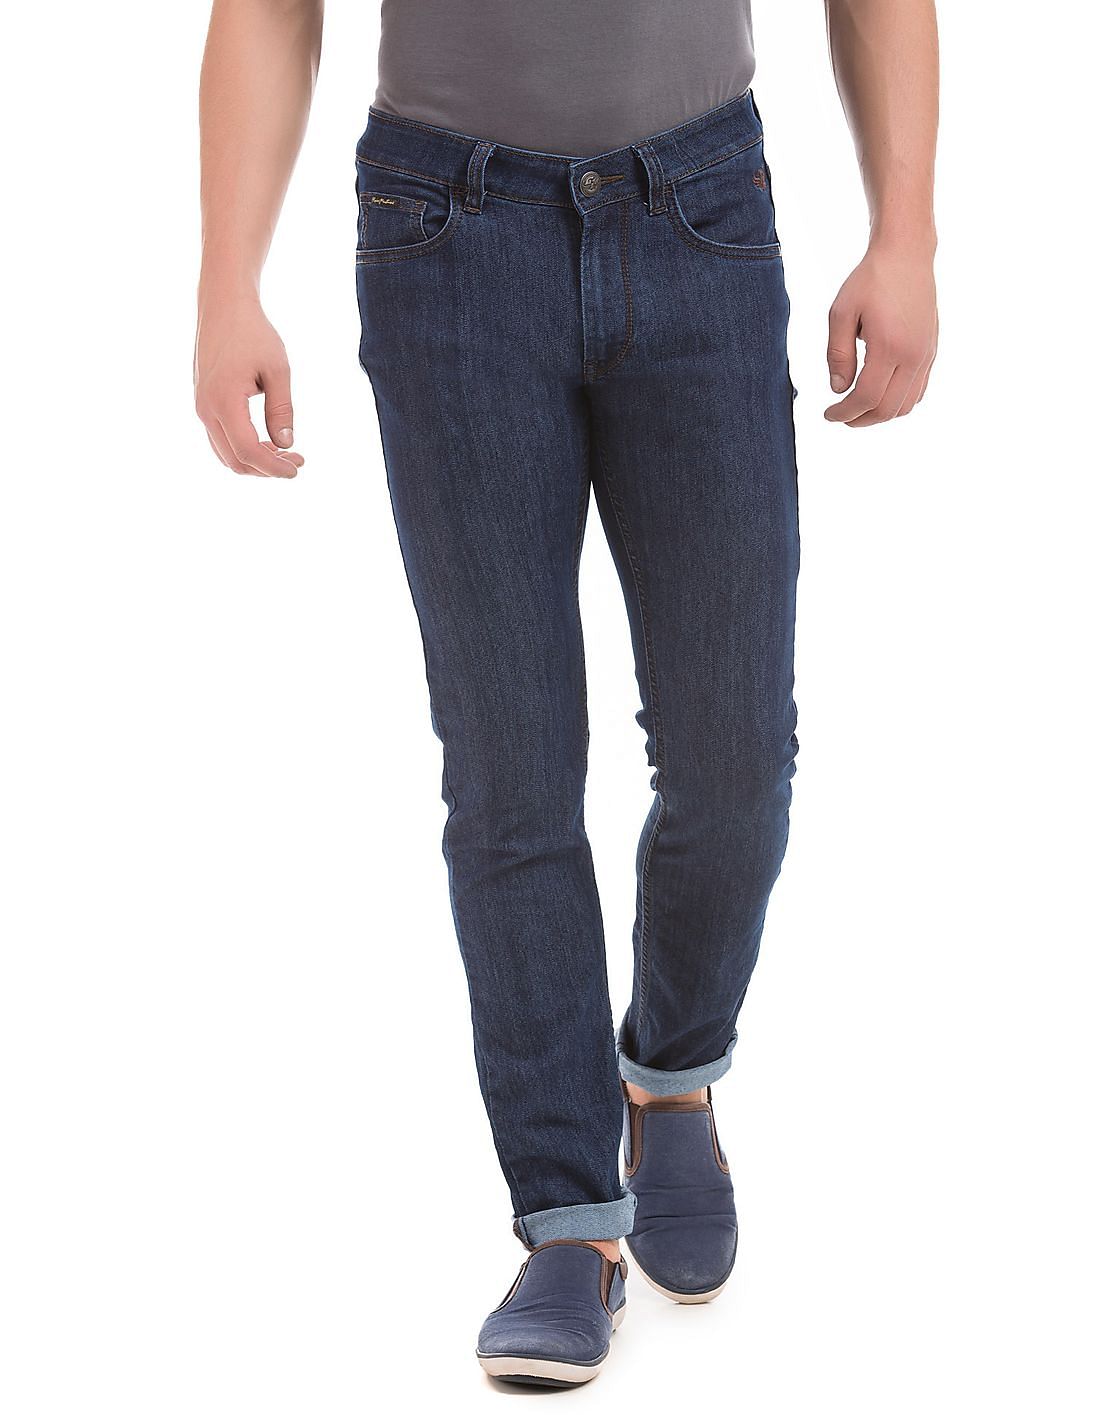 Buy Men Low Rise Skinny Fit Jeans online at NNNOW.com